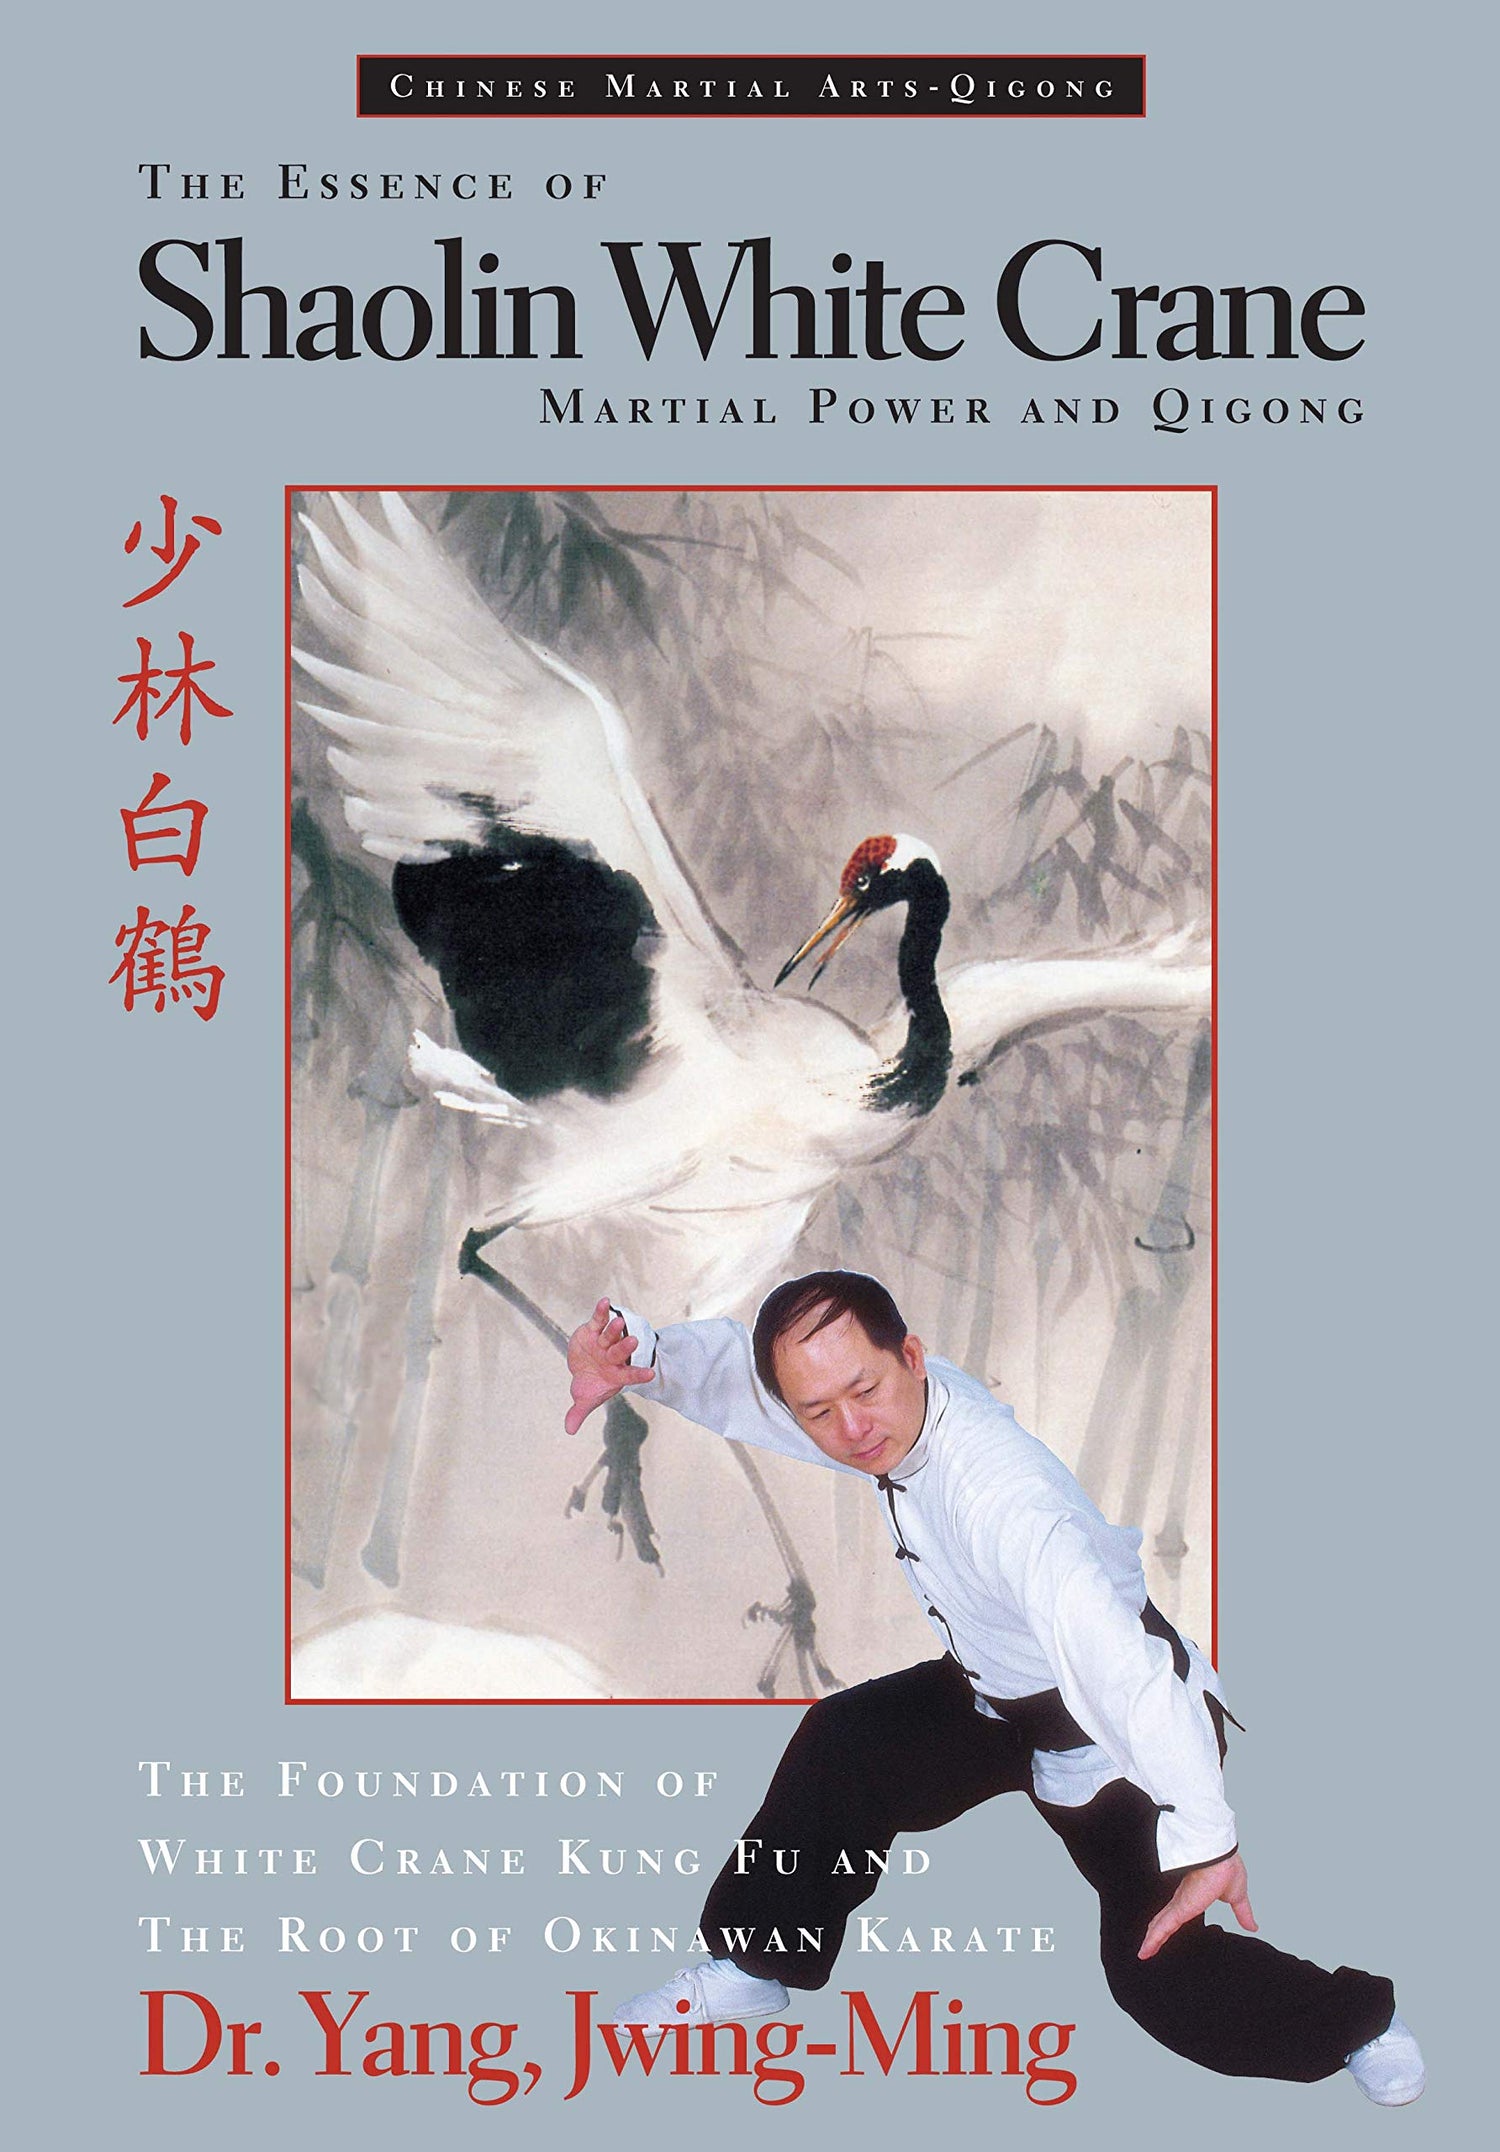 The Essence of Shaolin White Crane: Martial Power and Qigong Book by Dr Yang, Jwing Ming - Budovideos Inc